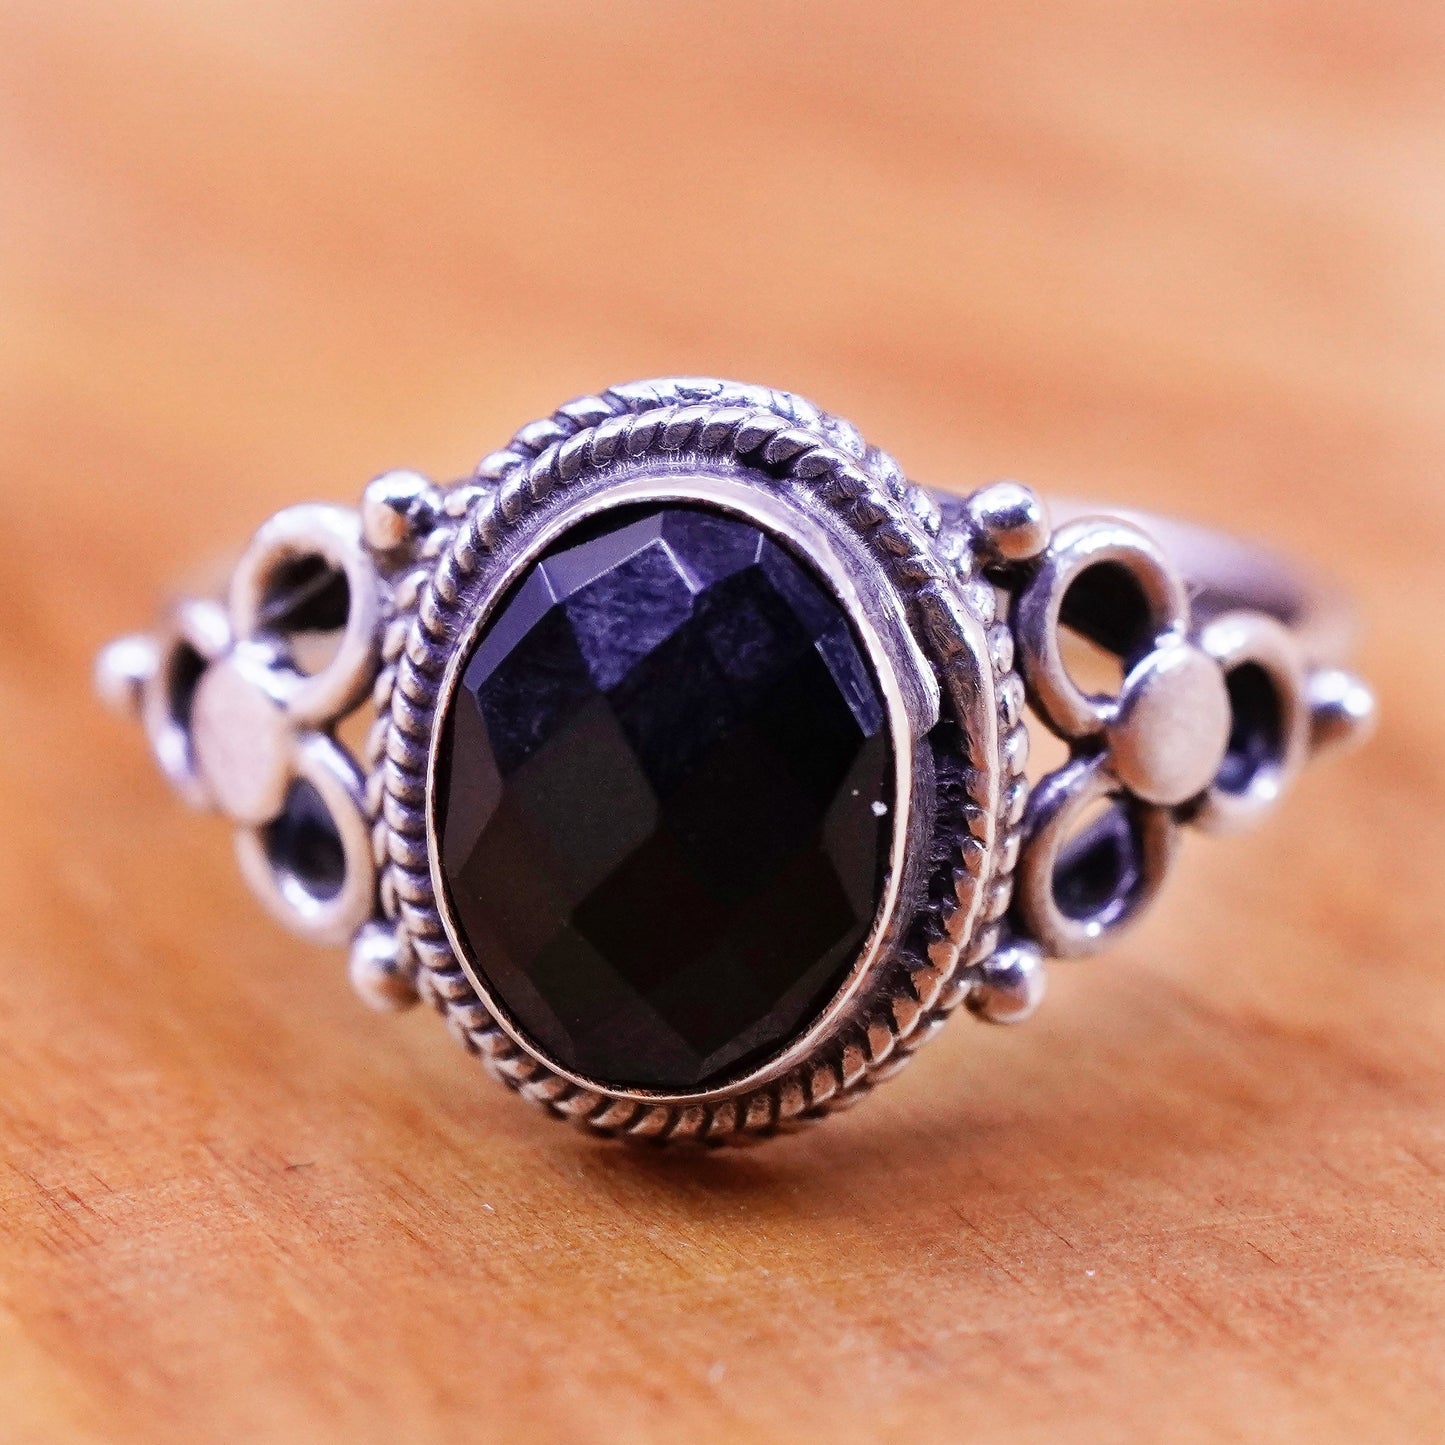 Size 6.75, vintage Sterling 925 silver handmade ring with obsidian and beads